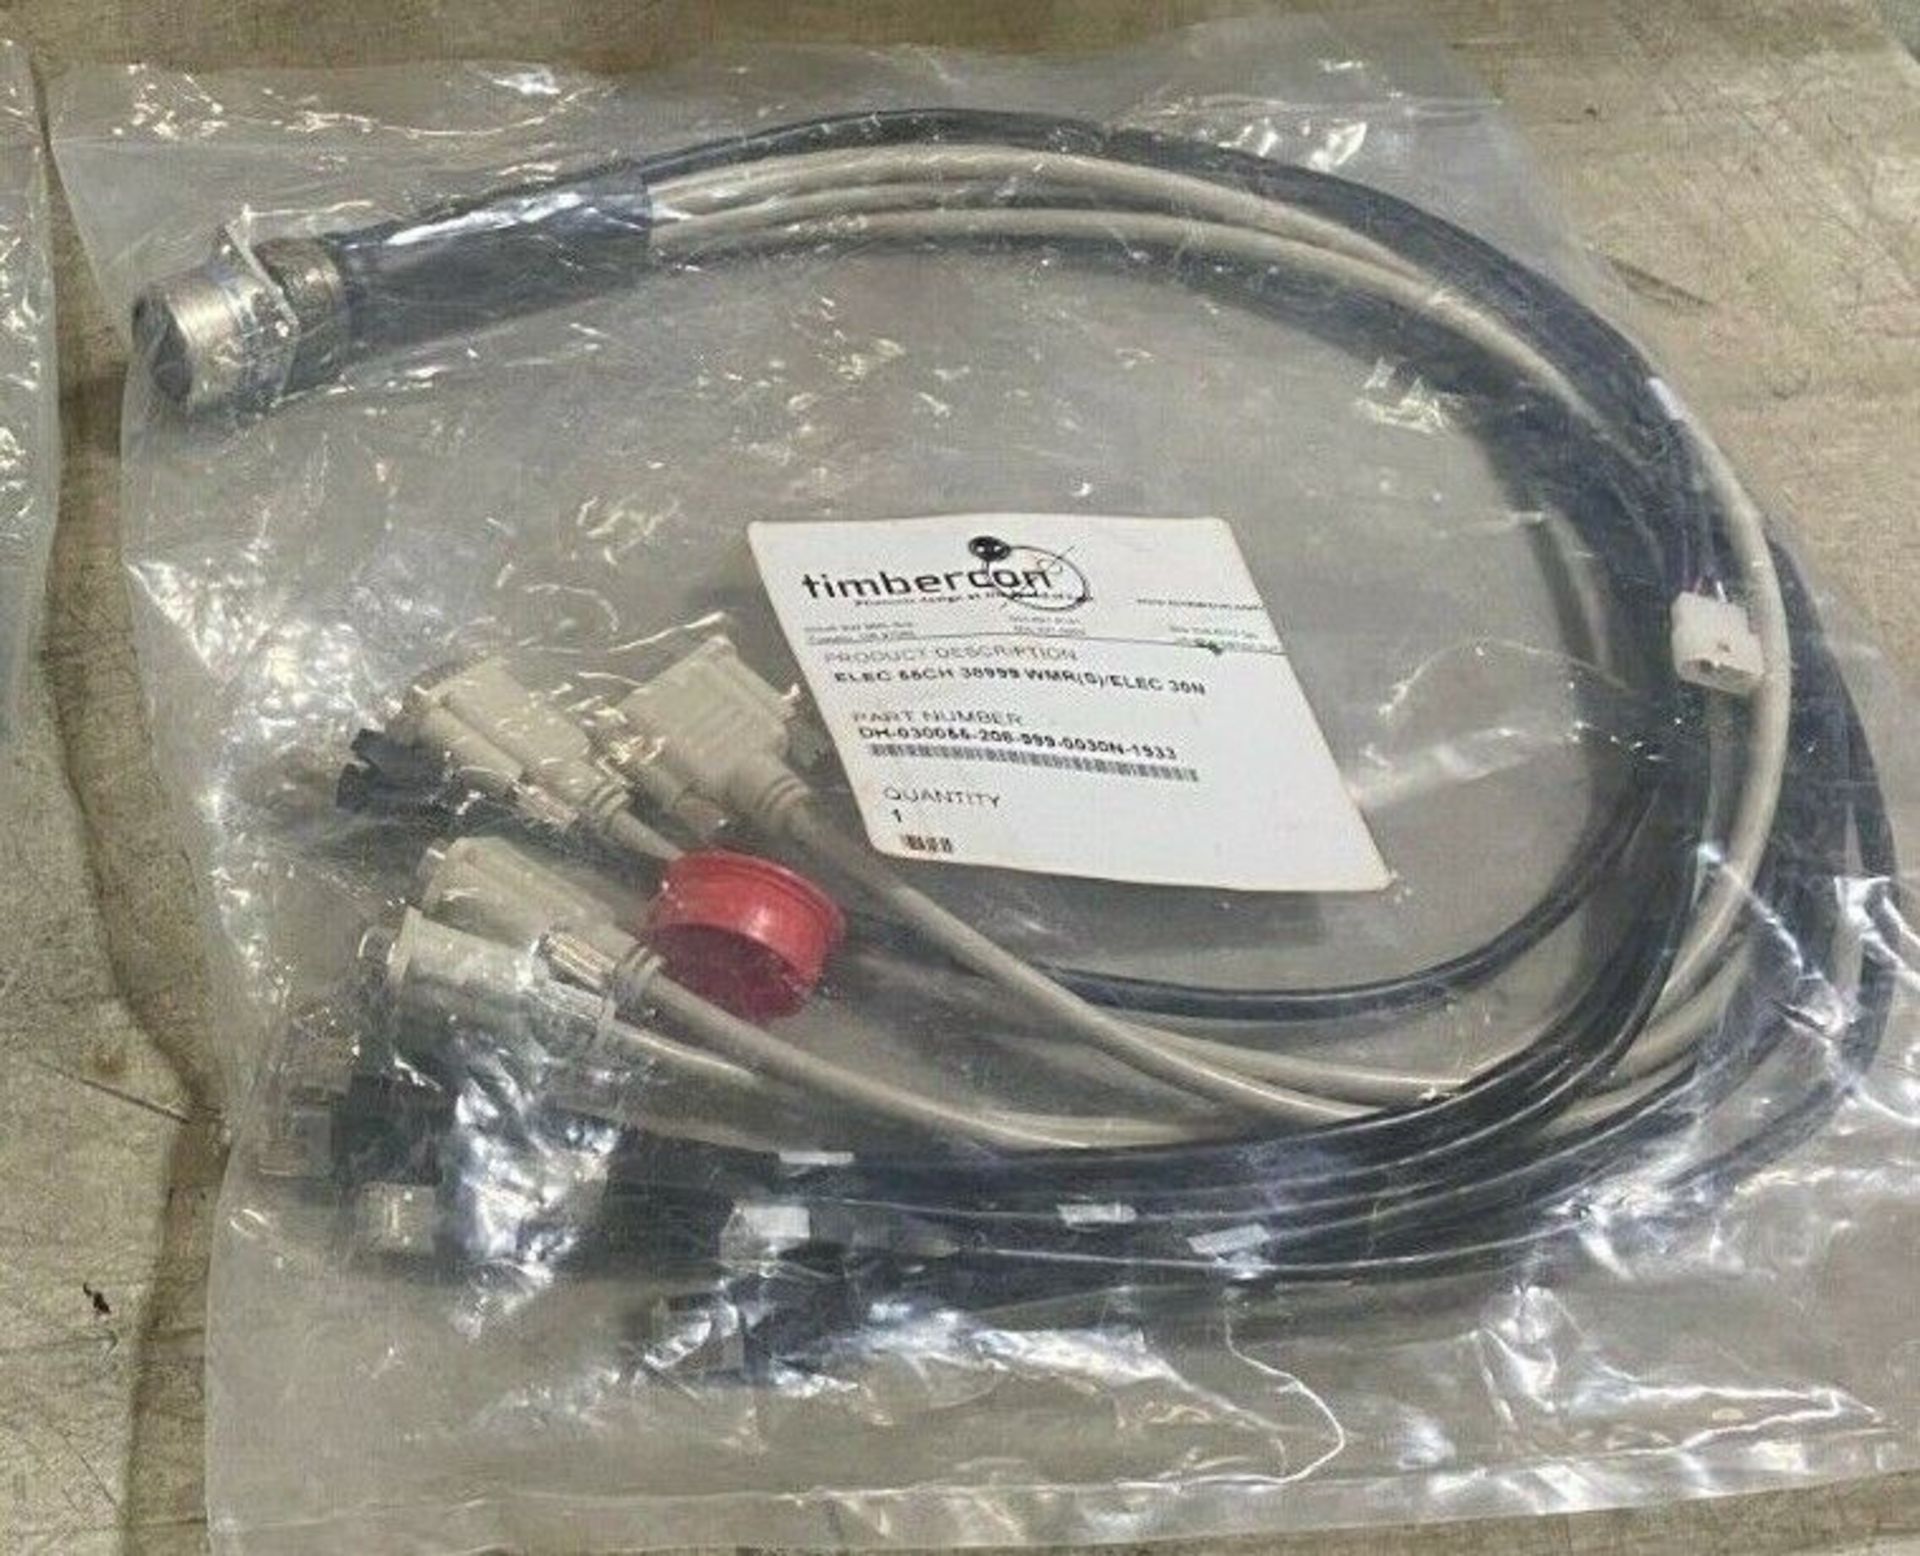 Timbercon Cable ELEC 55CH 38999 WMR(S)/ELEC 30N - DH-030055-208-999-0020N-1933